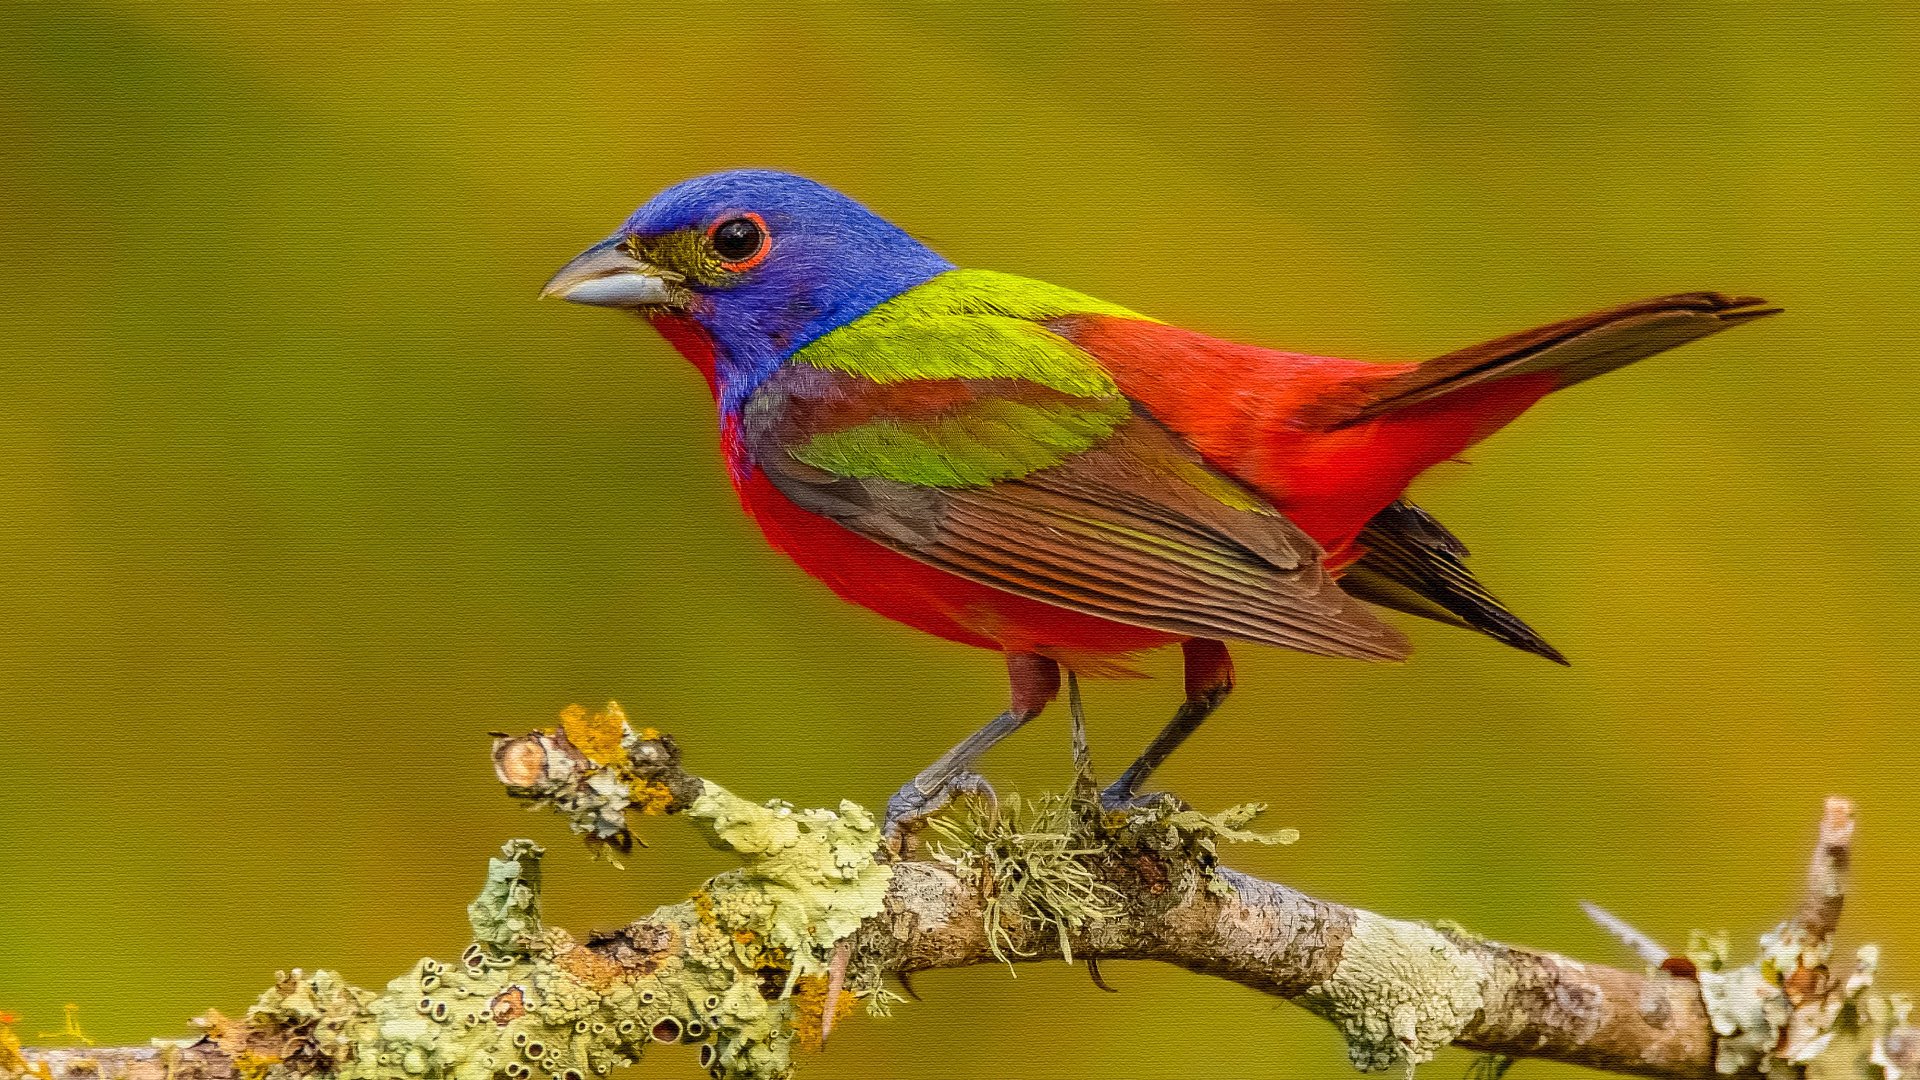 Painted Bunting Bird Images : Painted Bunting Bird Birds Texas Male ...